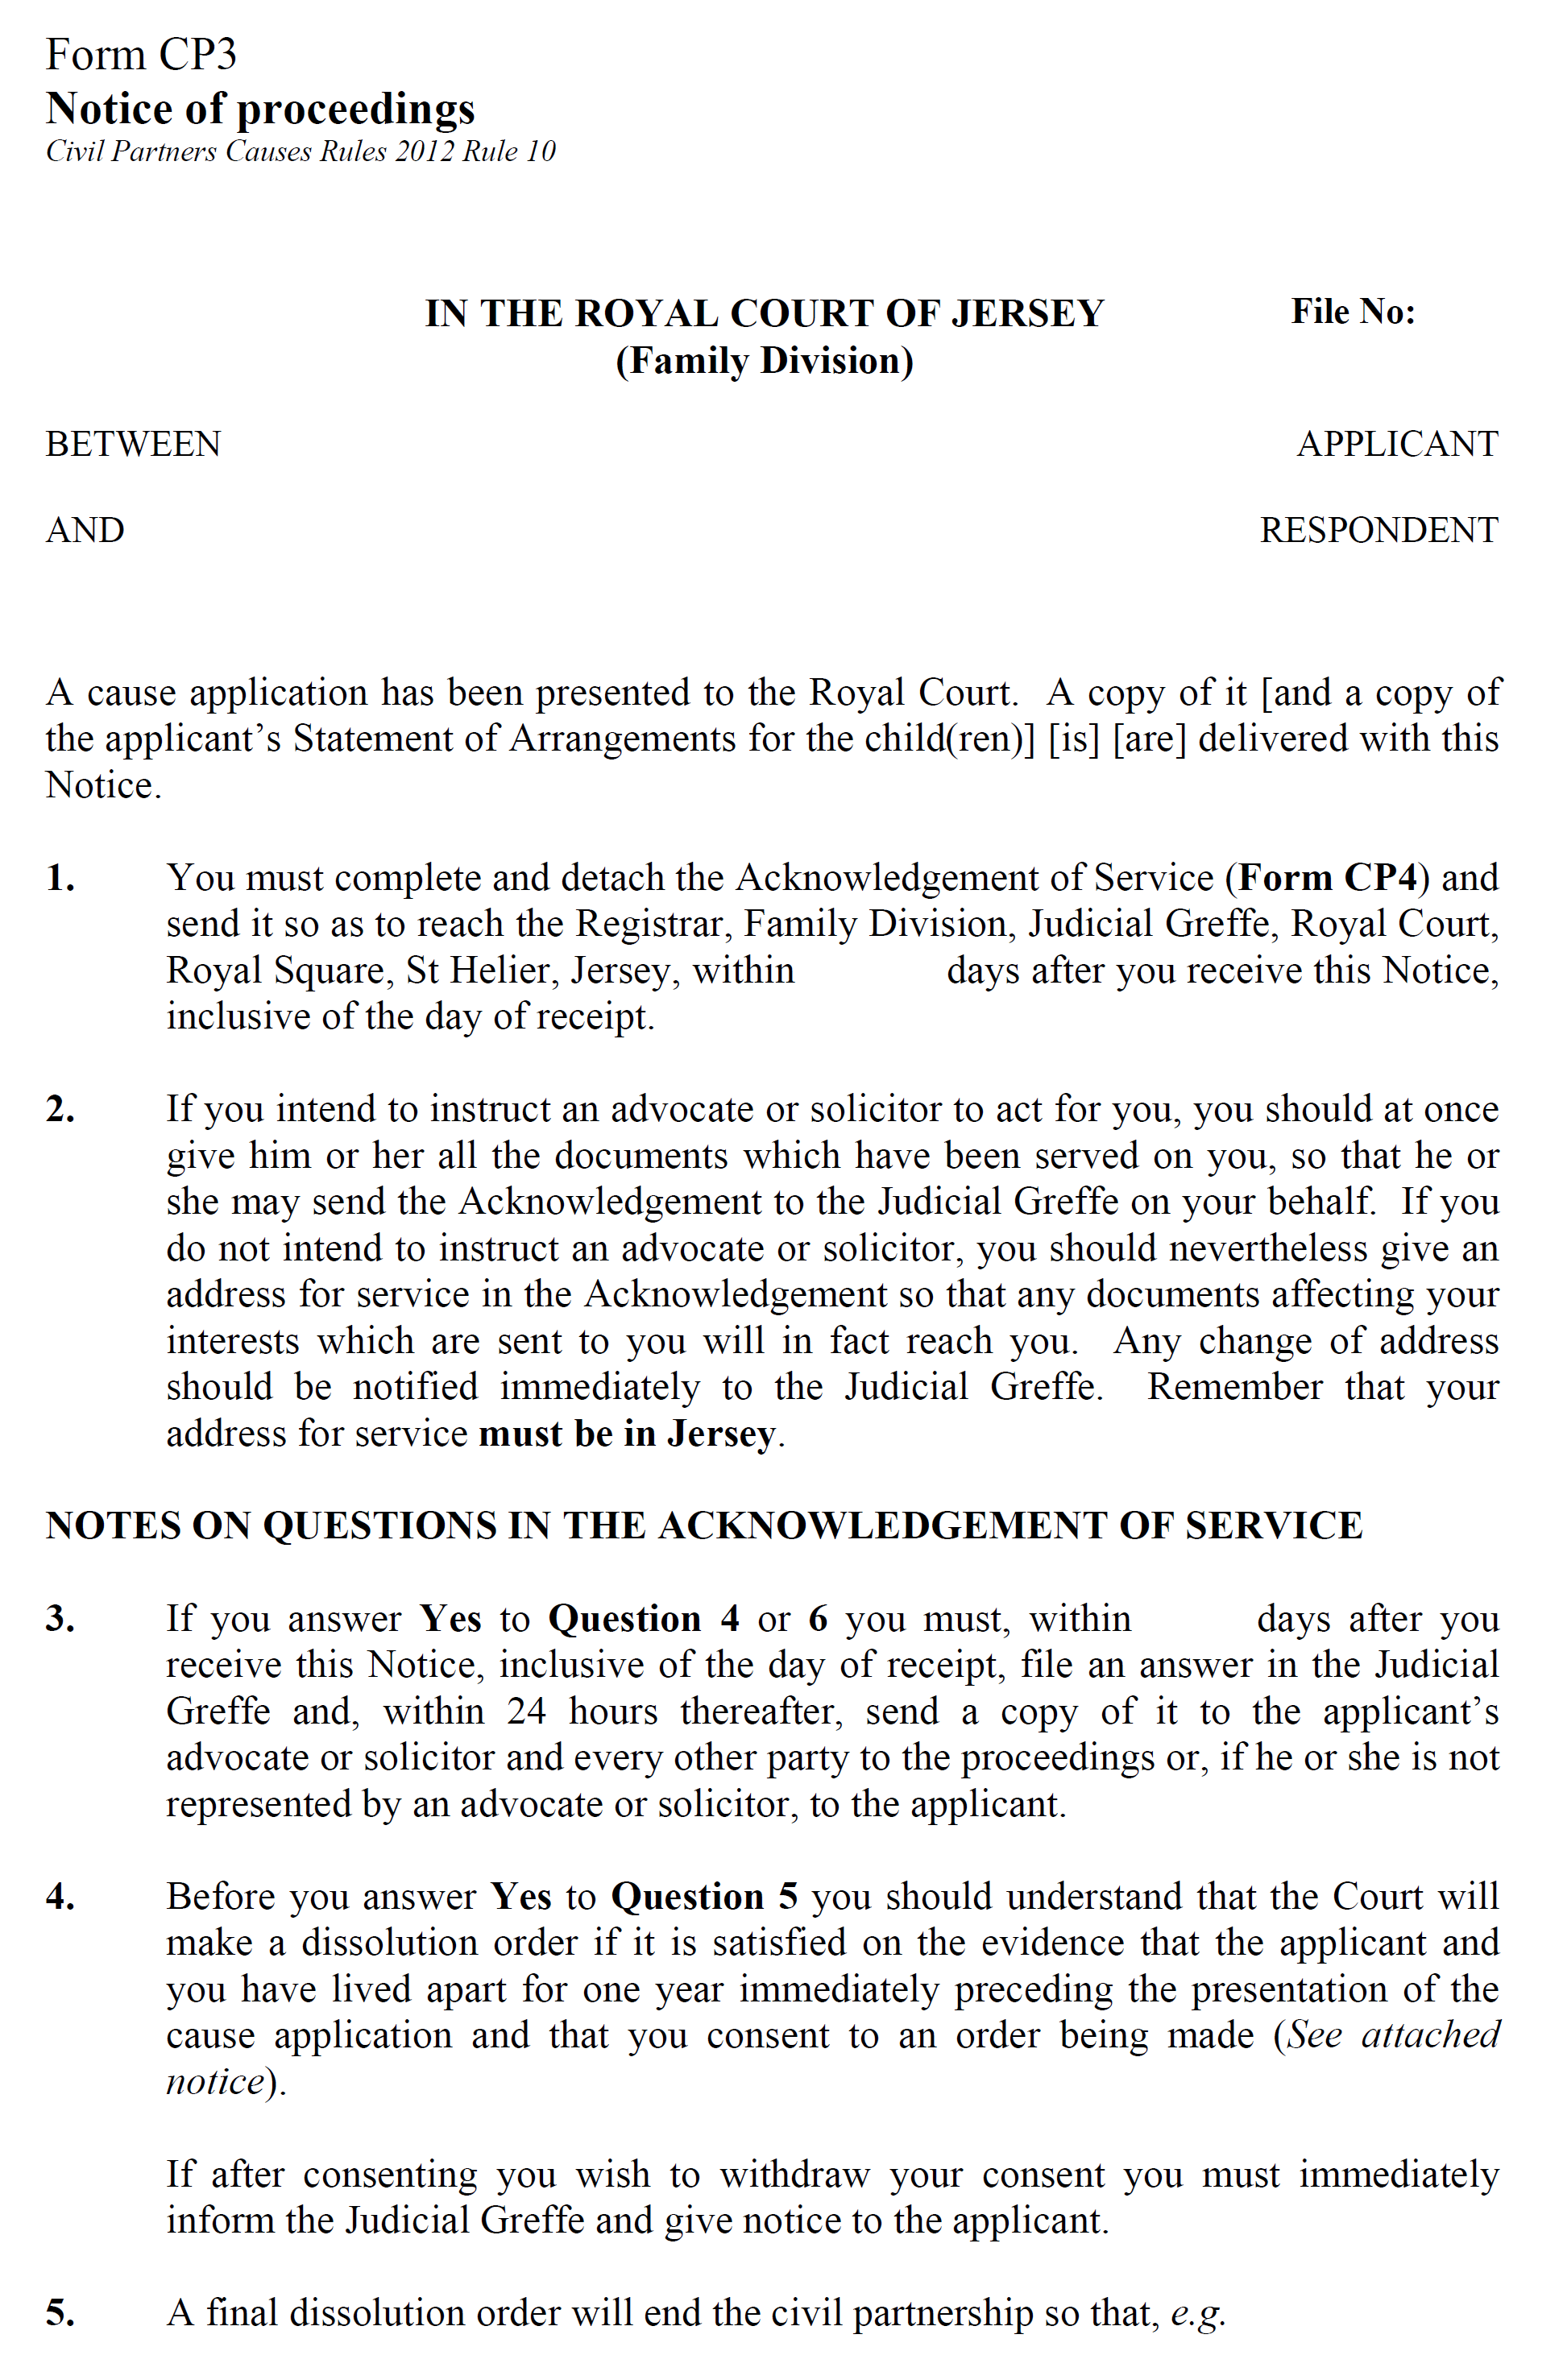 Form CP3 - Notice of proceedings